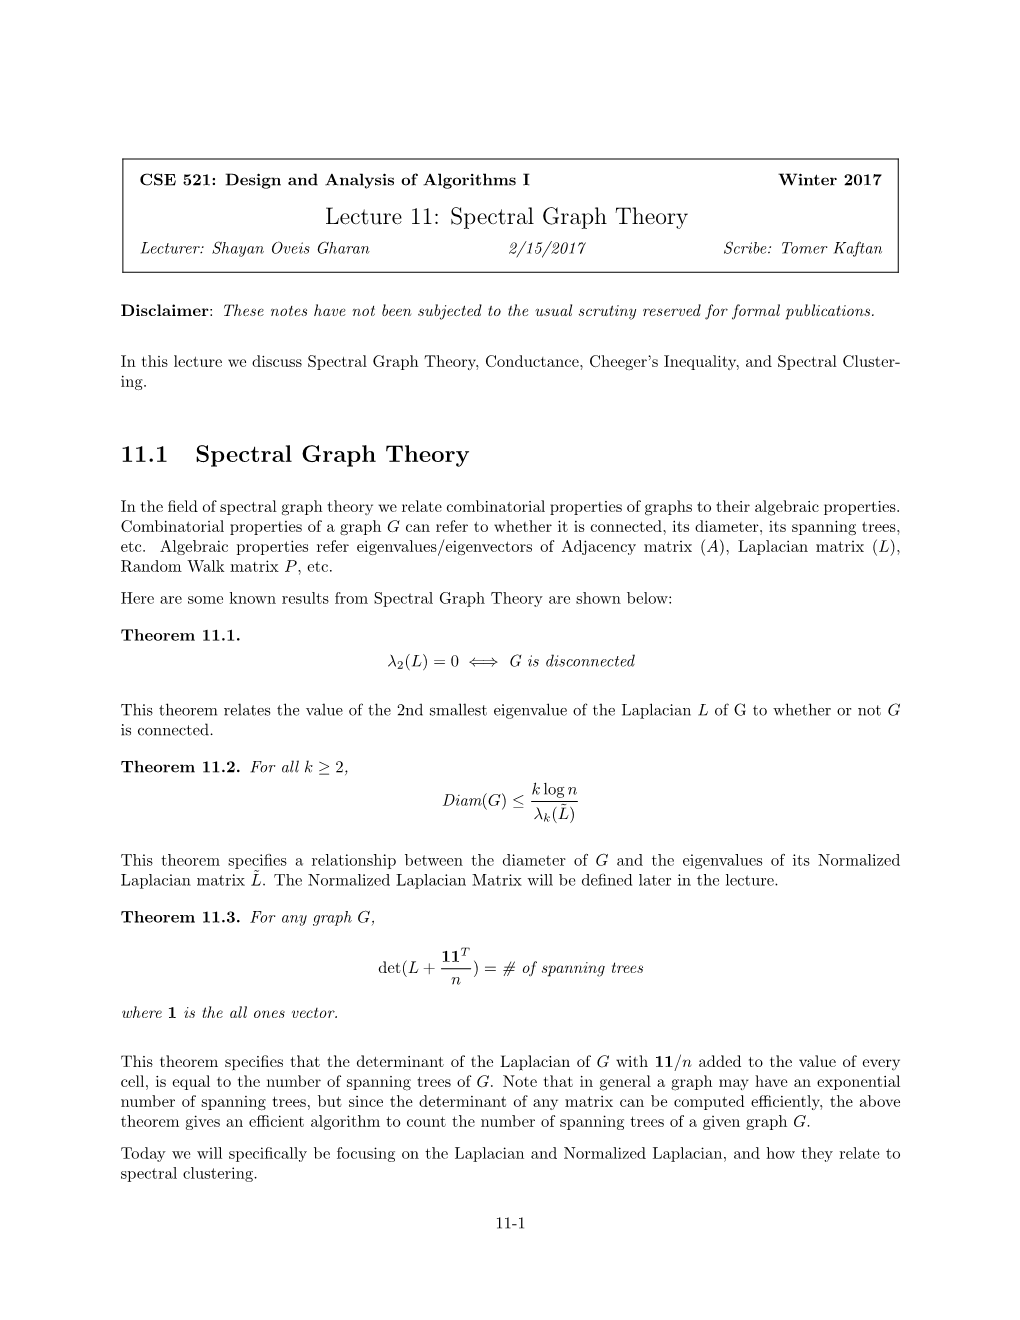 Lecture 11: Spectral Graph Theory 11.1 Spectral Graph